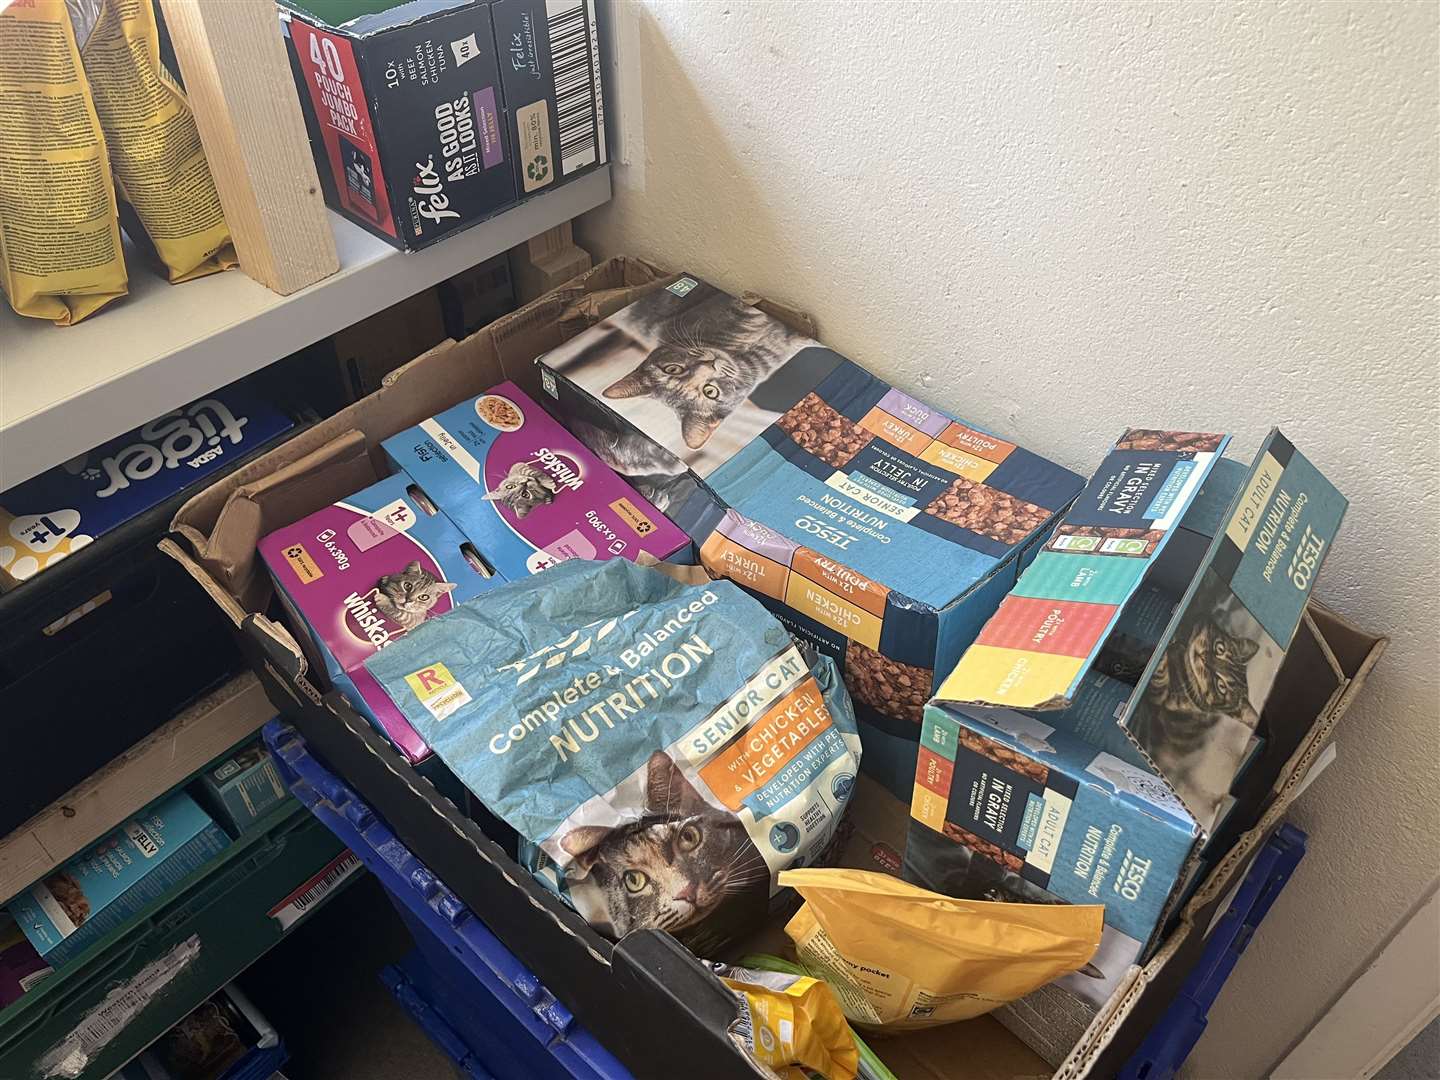 Due to only just opening, the team are going to assess whether they need to amend their opening times so that people who work during the day can pick up their pet food parcels